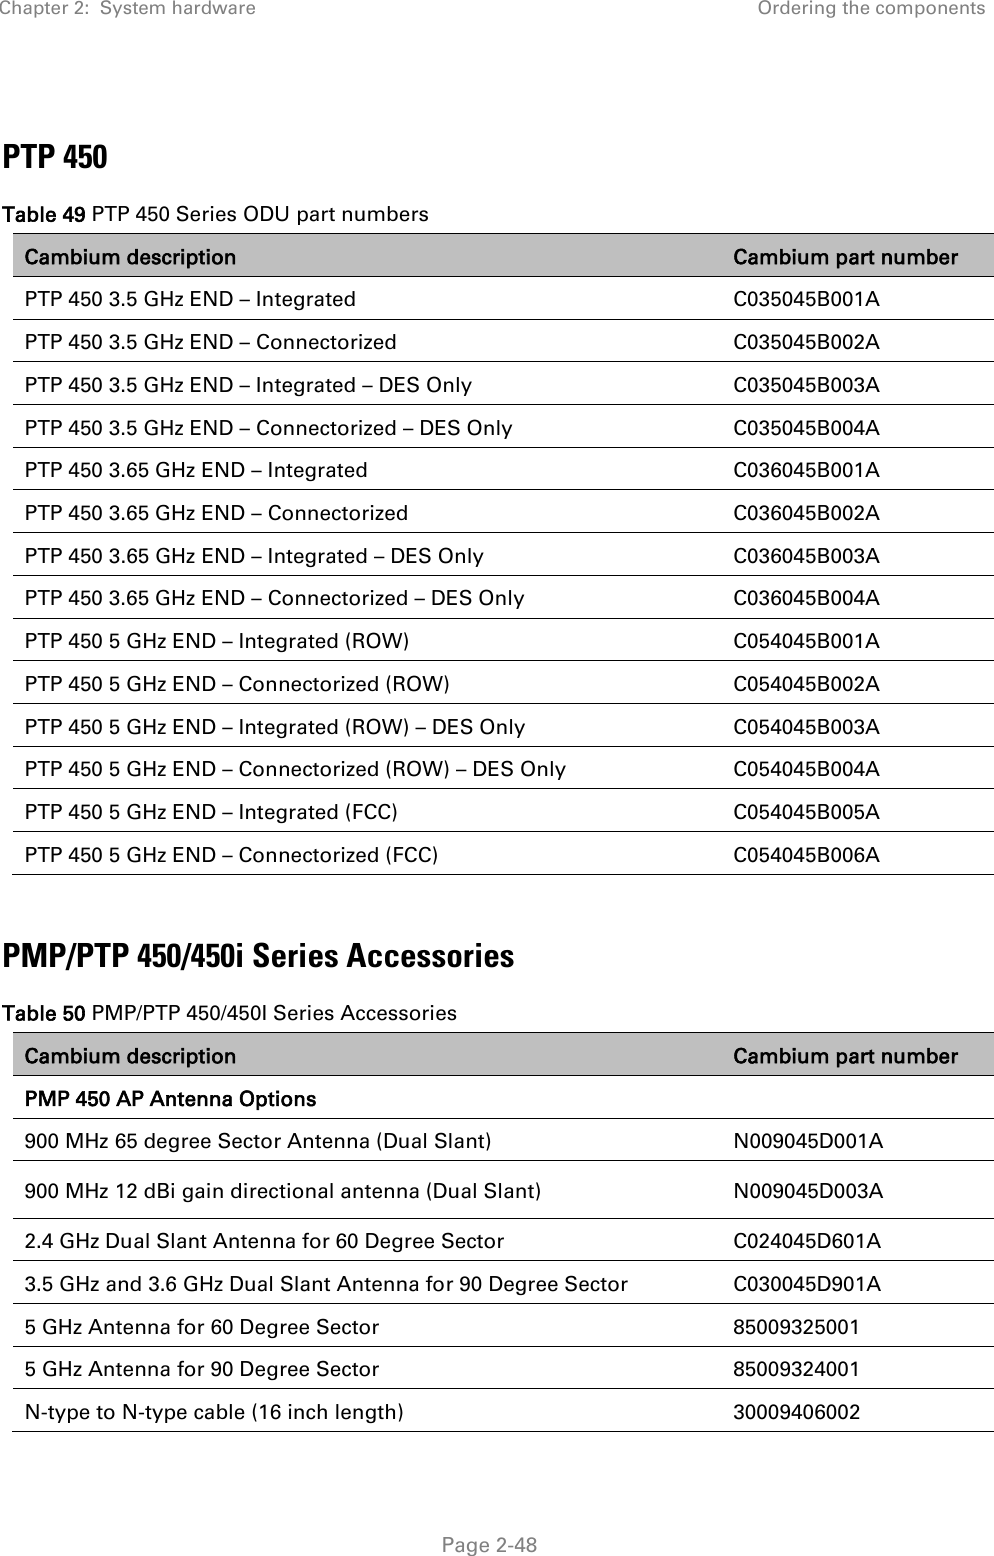 Chapter 2:  System hardware Ordering the components   Page 2-48  PTP 450 Table 49 PTP 450 Series ODU part numbers Cambium description Cambium part number PTP 450 3.5 GHz END – Integrated C035045B001A PTP 450 3.5 GHz END – Connectorized C035045B002A PTP 450 3.5 GHz END – Integrated – DES Only C035045B003A PTP 450 3.5 GHz END – Connectorized – DES Only C035045B004A PTP 450 3.65 GHz END – Integrated C036045B001A PTP 450 3.65 GHz END – Connectorized C036045B002A PTP 450 3.65 GHz END – Integrated – DES Only C036045B003A PTP 450 3.65 GHz END – Connectorized – DES Only C036045B004A PTP 450 5 GHz END – Integrated (ROW) C054045B001A PTP 450 5 GHz END – Connectorized (ROW) C054045B002A PTP 450 5 GHz END – Integrated (ROW) – DES Only C054045B003A PTP 450 5 GHz END – Connectorized (ROW) – DES Only C054045B004A PTP 450 5 GHz END – Integrated (FCC) C054045B005A PTP 450 5 GHz END – Connectorized (FCC) C054045B006A  PMP/PTP 450/450i Series Accessories Table 50 PMP/PTP 450/450I Series Accessories Cambium description Cambium part number PMP 450 AP Antenna Options  900 MHz 65 degree Sector Antenna (Dual Slant) N009045D001A 900 MHz 12 dBi gain directional antenna (Dual Slant) N009045D003A 2.4 GHz Dual Slant Antenna for 60 Degree Sector C024045D601A 3.5 GHz and 3.6 GHz Dual Slant Antenna for 90 Degree Sector C030045D901A 5 GHz Antenna for 60 Degree Sector 85009325001 5 GHz Antenna for 90 Degree Sector 85009324001 N-type to N-type cable (16 inch length) 30009406002 